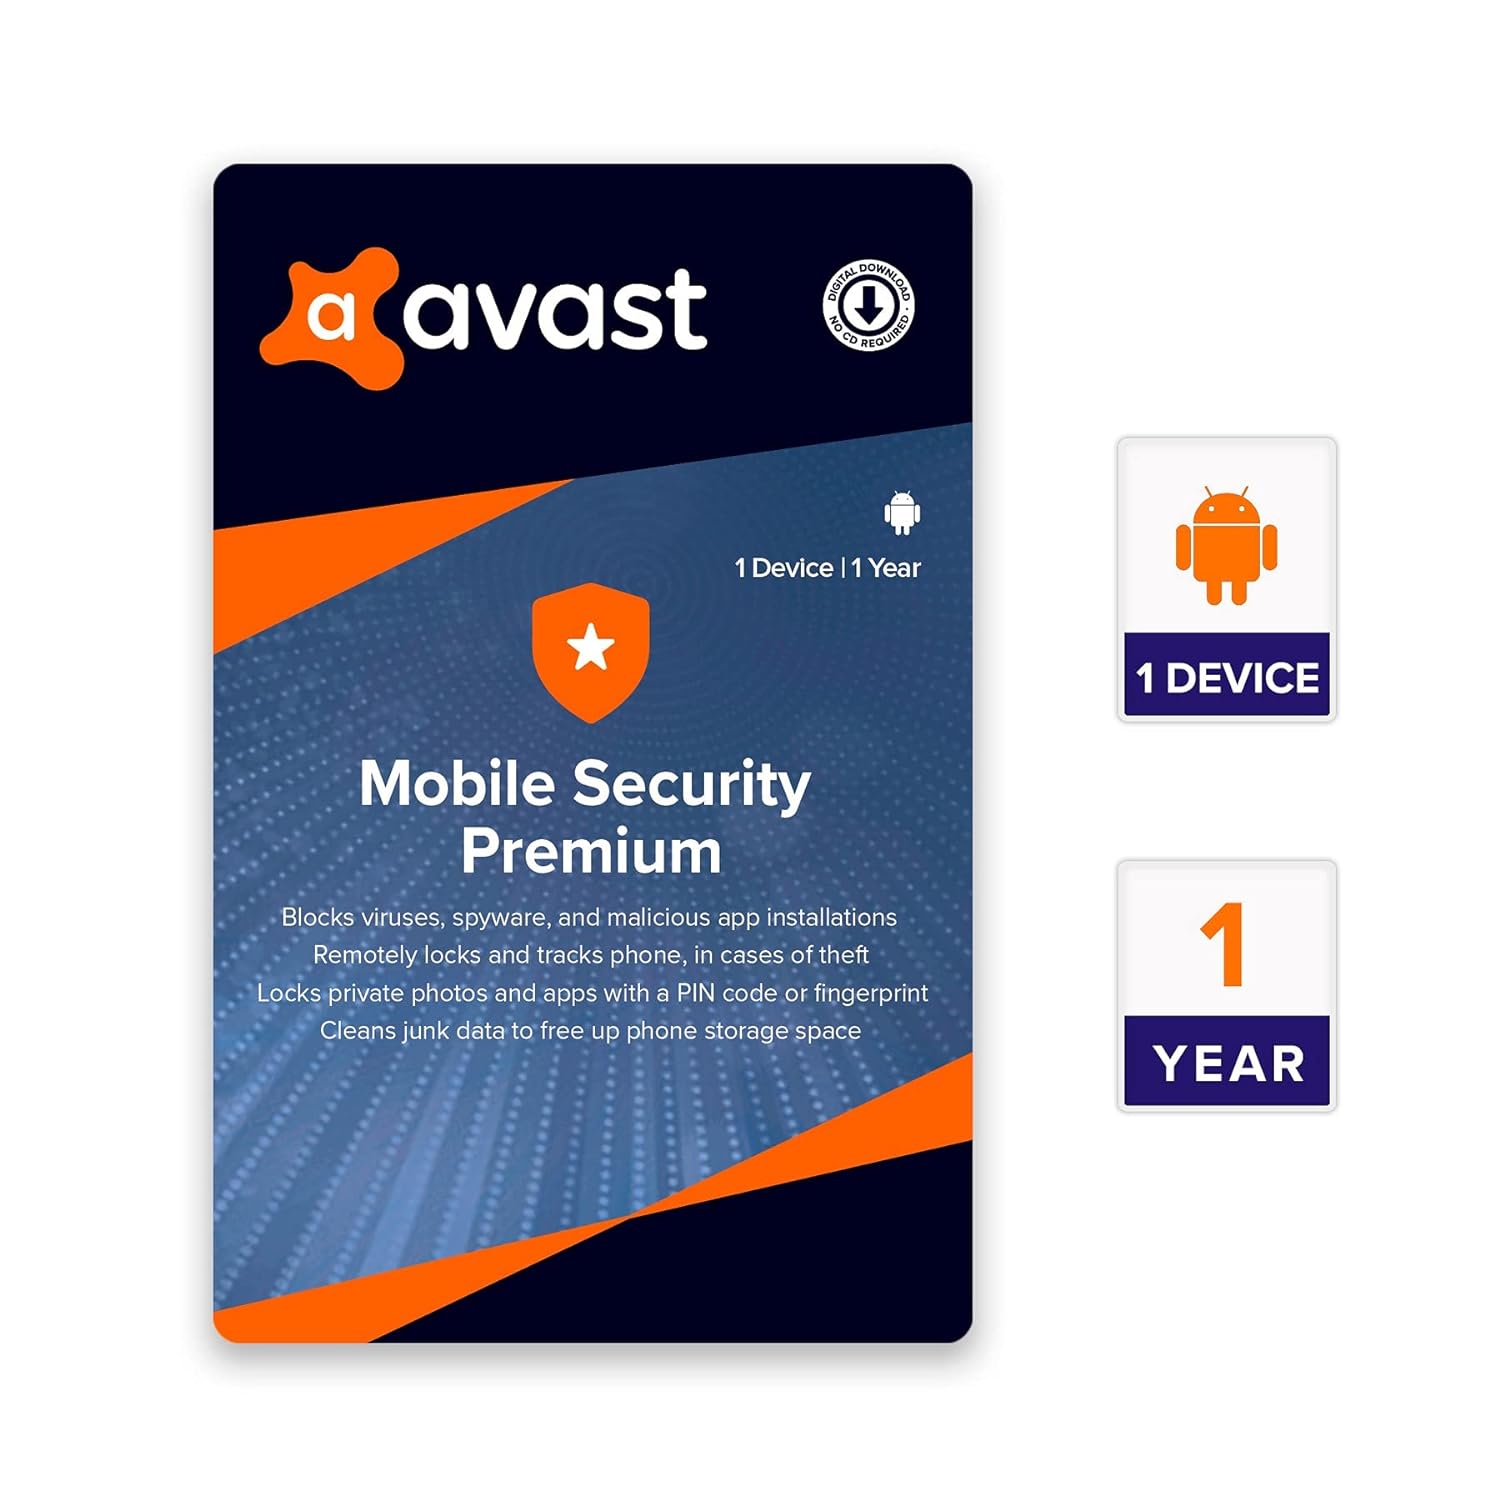 Avast Ultimate Mobile Security Premium for Android 2023 Key (1 Year / 1 Device), $7.41